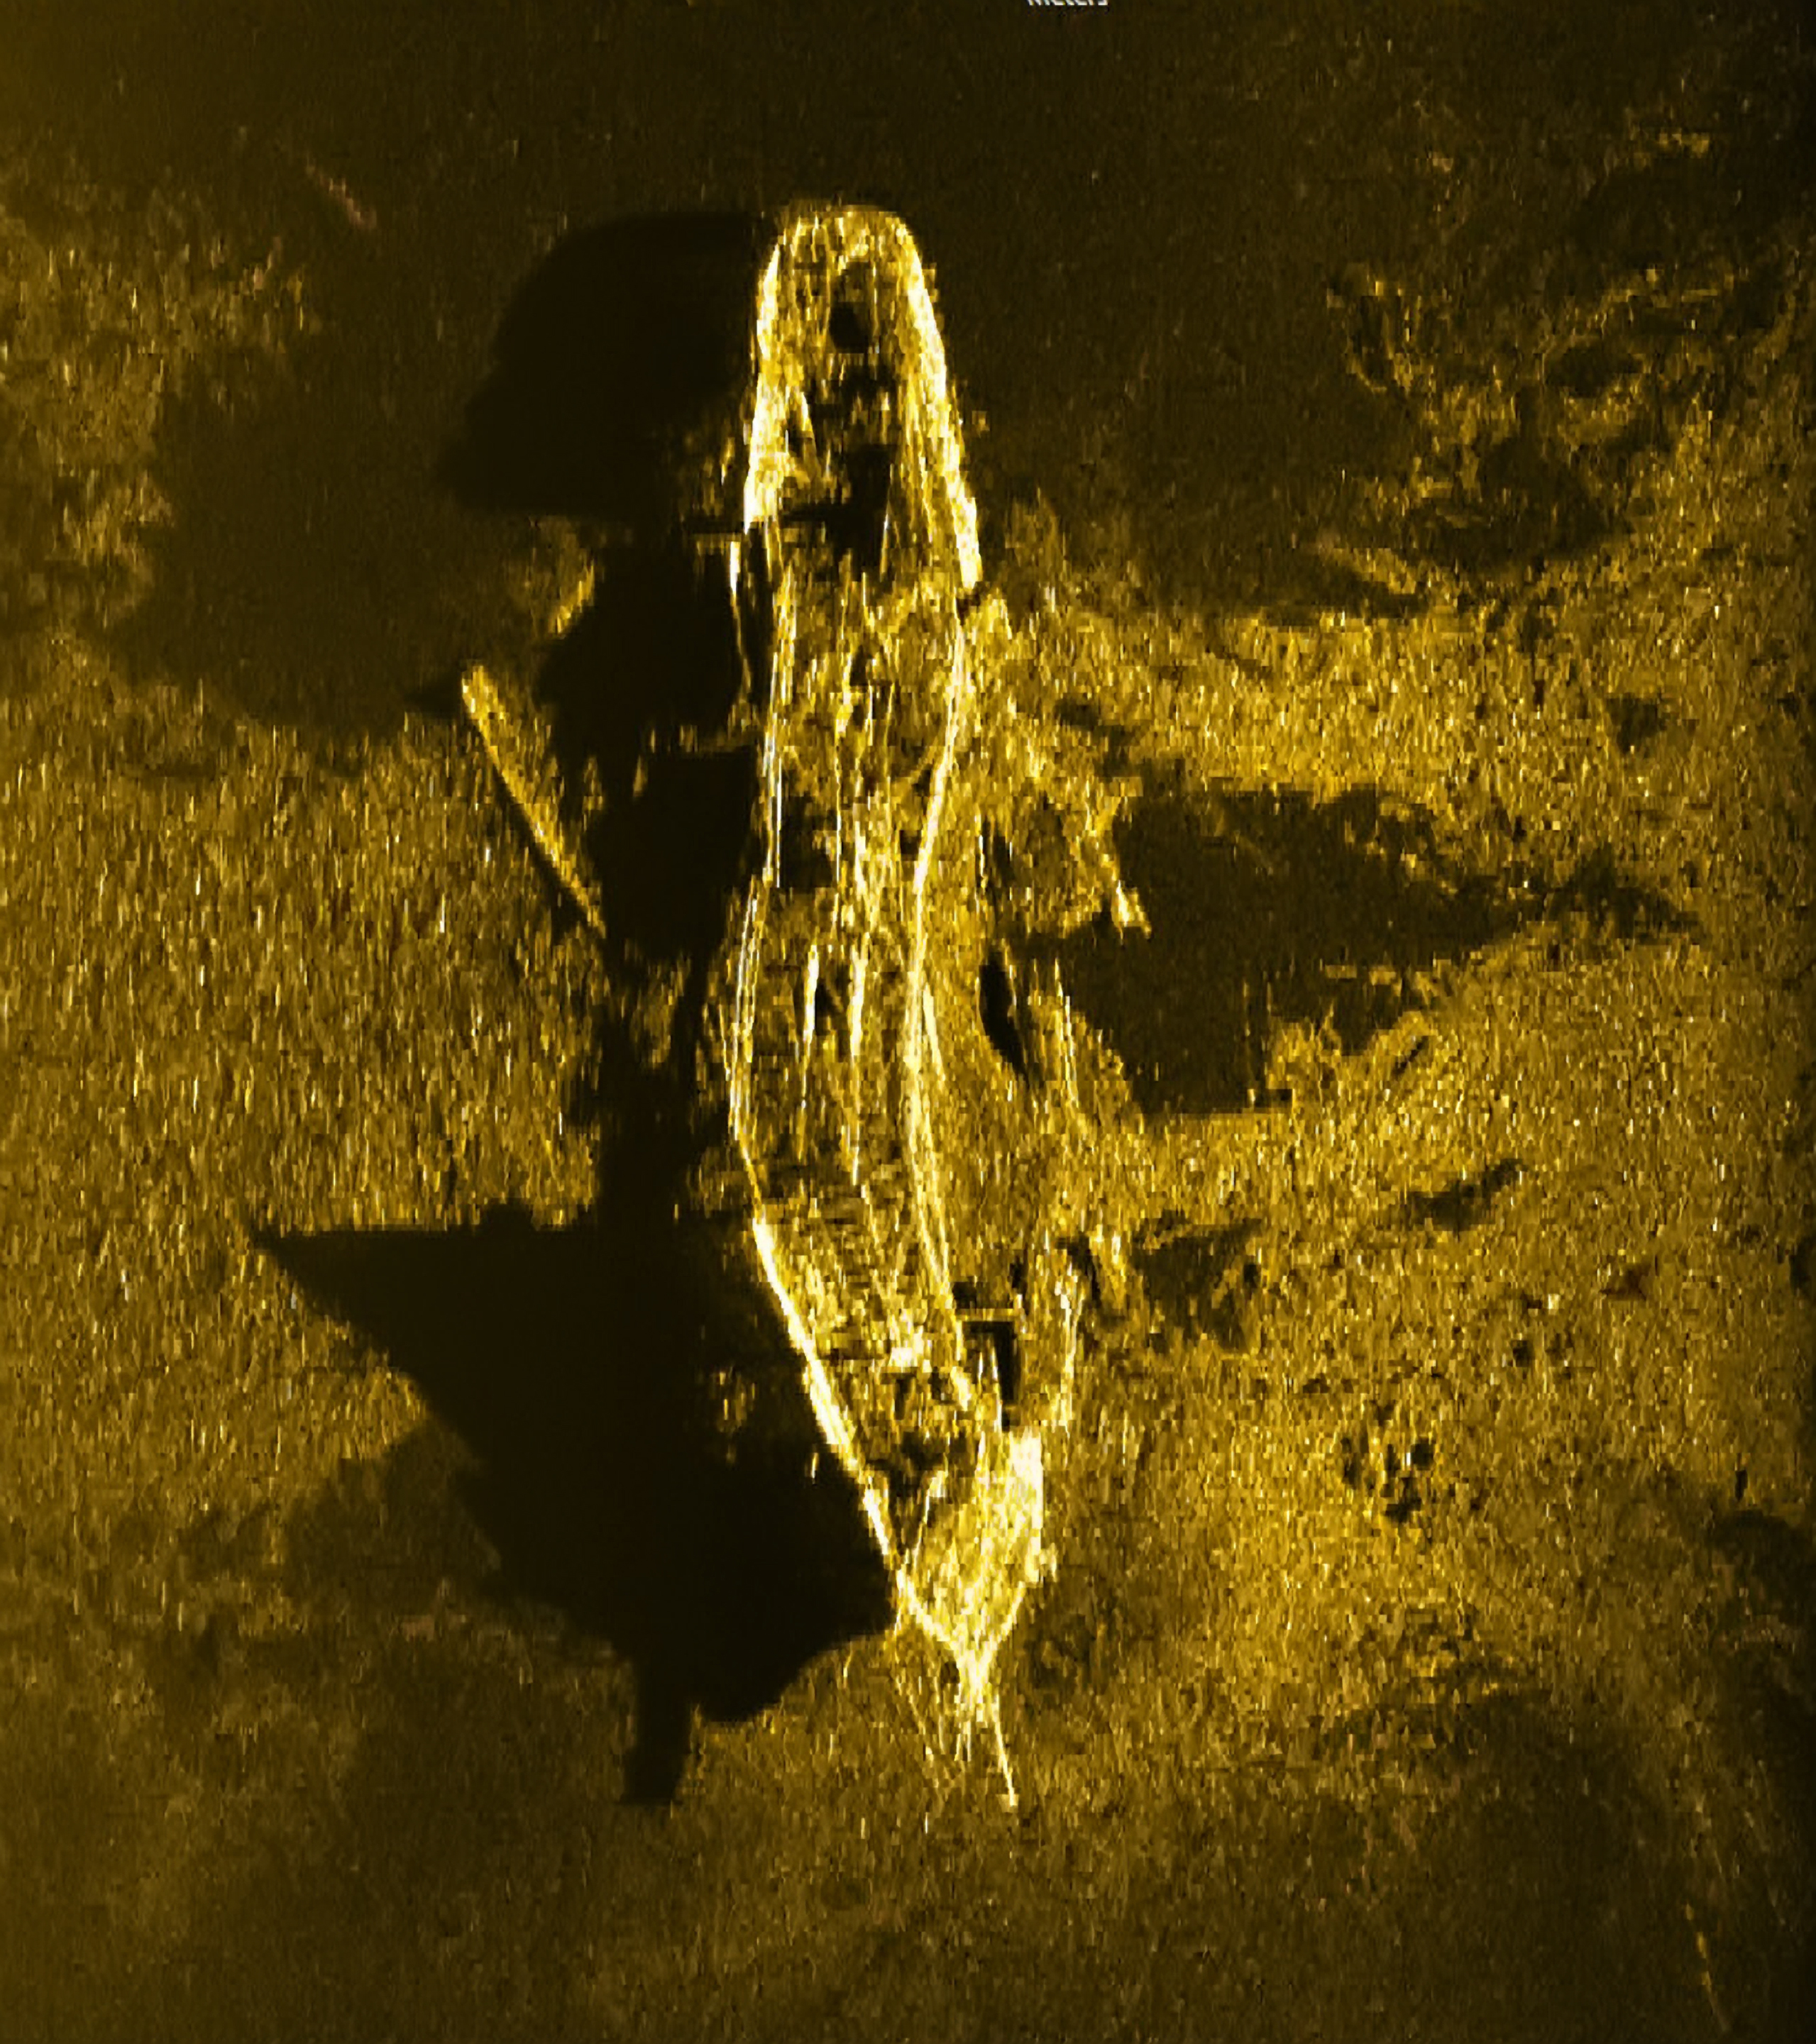 A_shipwreck_discovered_in_December_2015.jpg